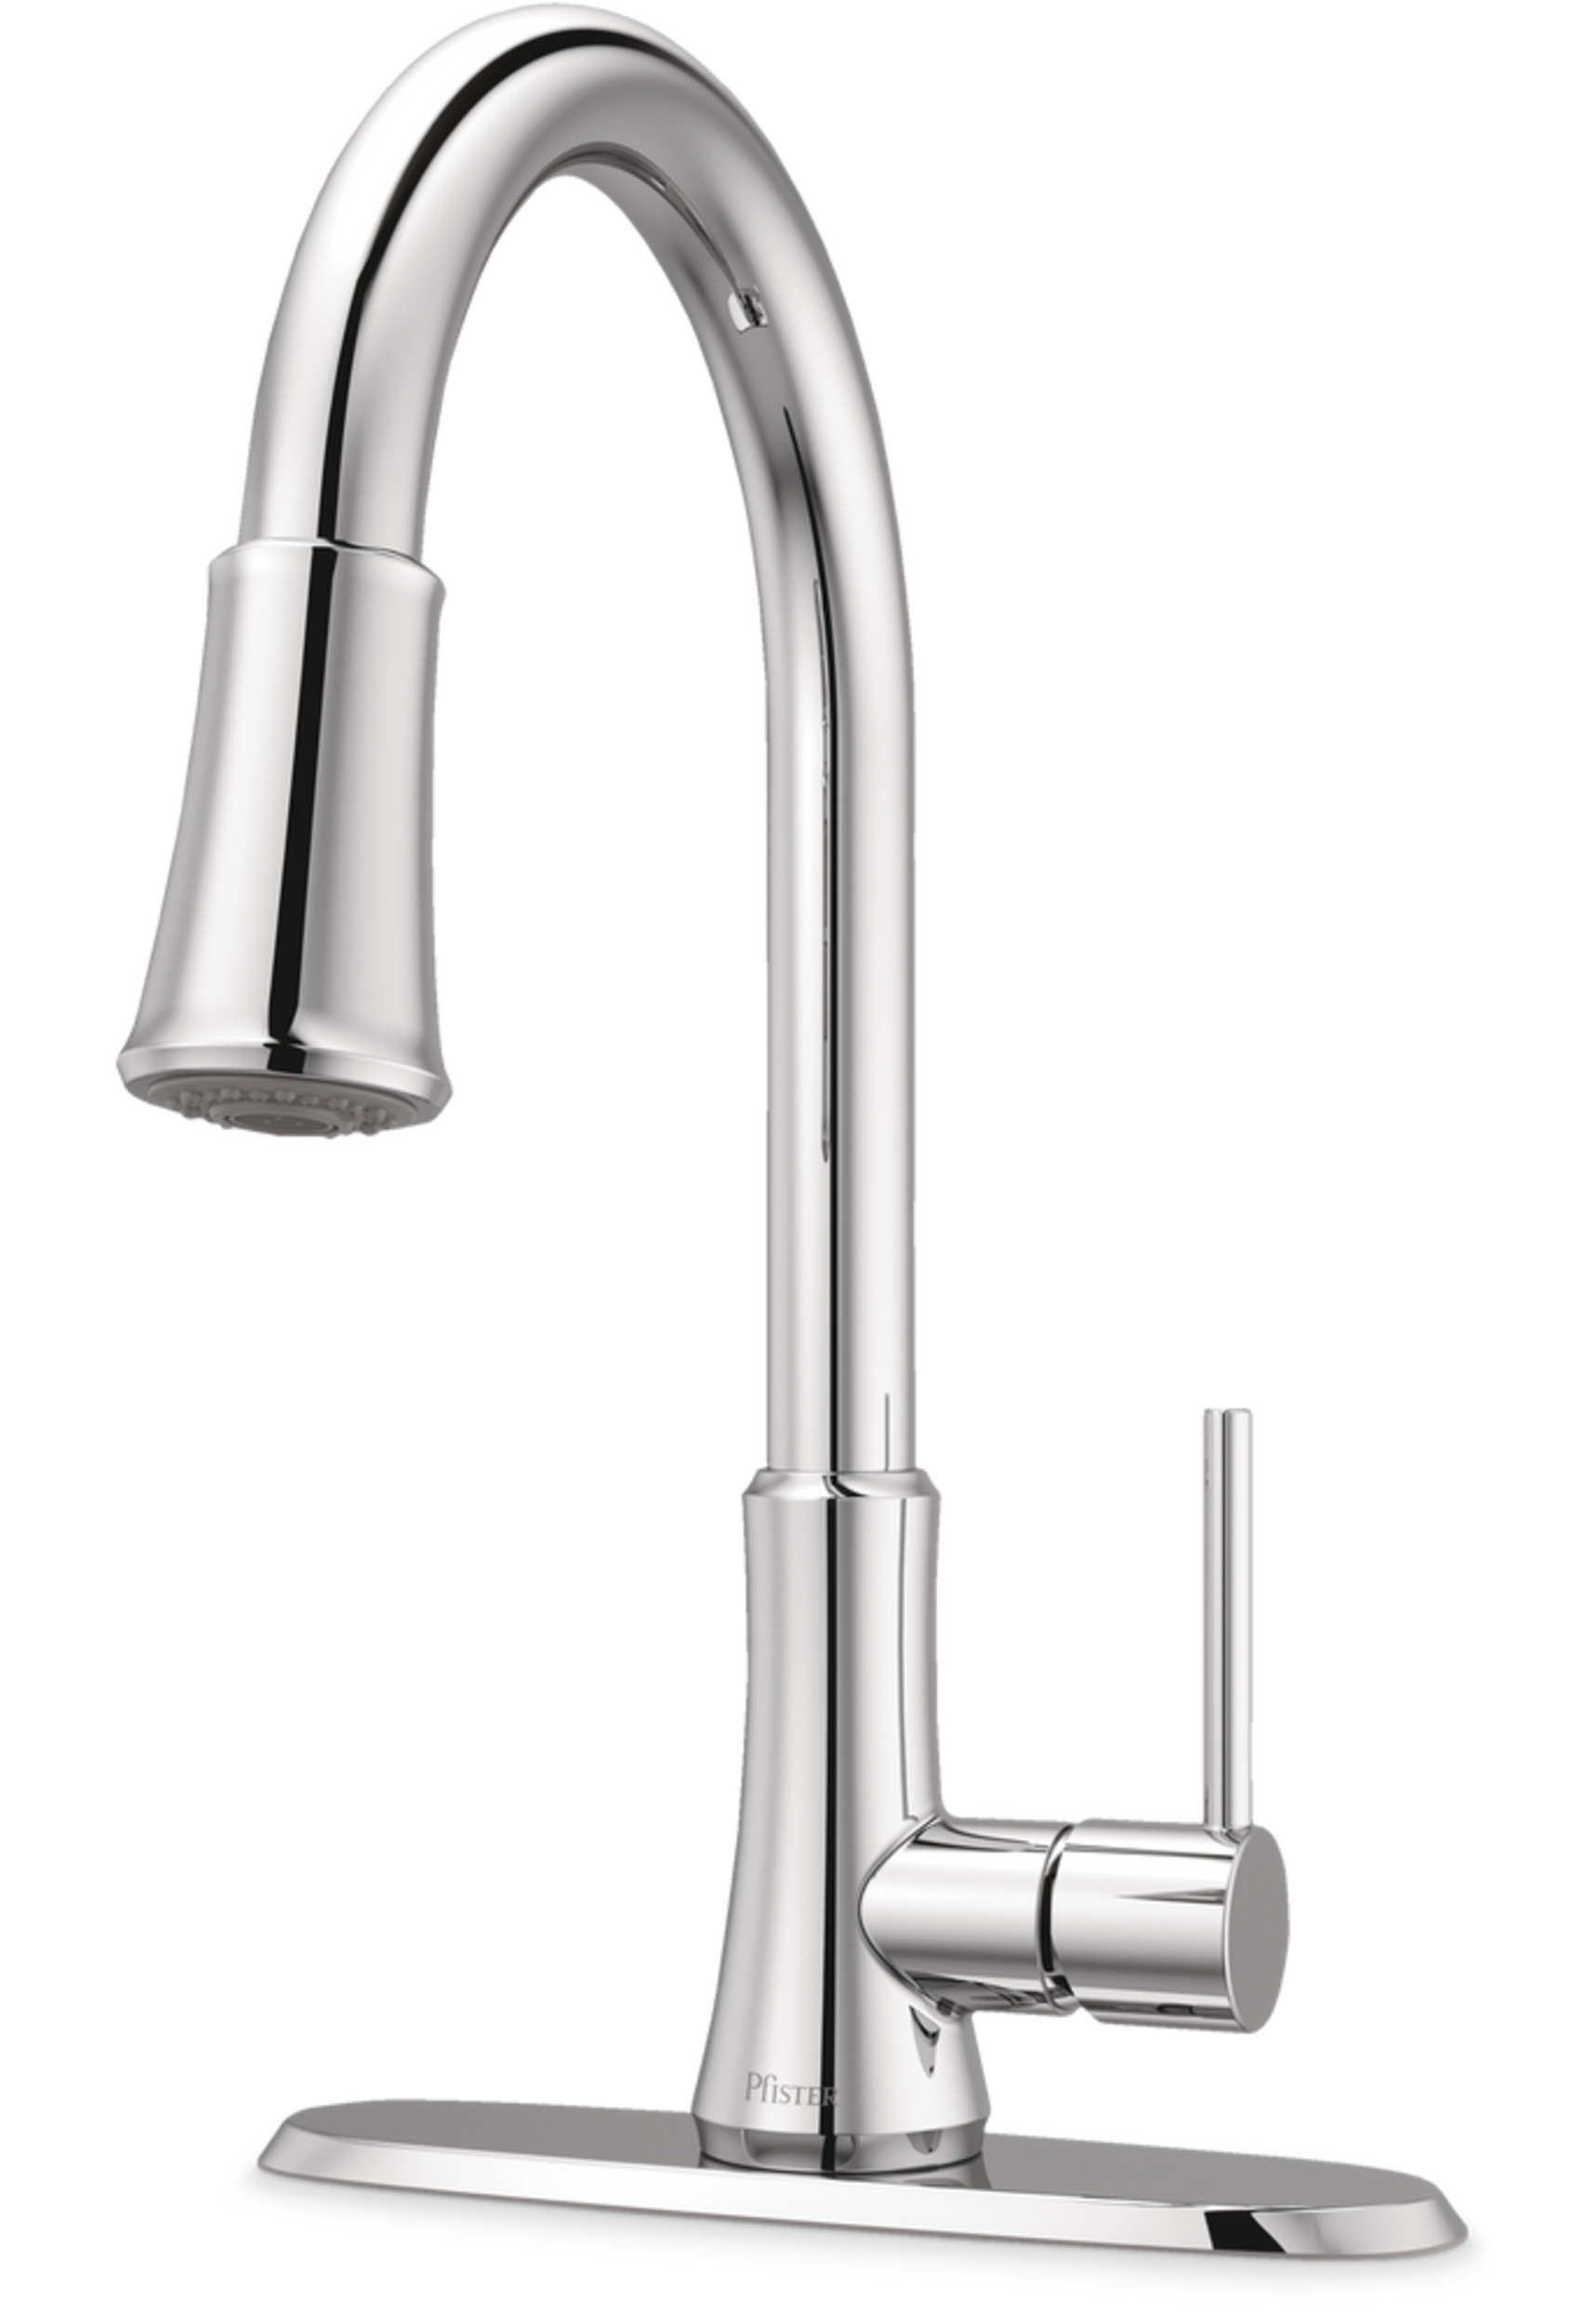 Pfister Classic Single Handle Pull Down Kitchen Faucet, Chrome ...